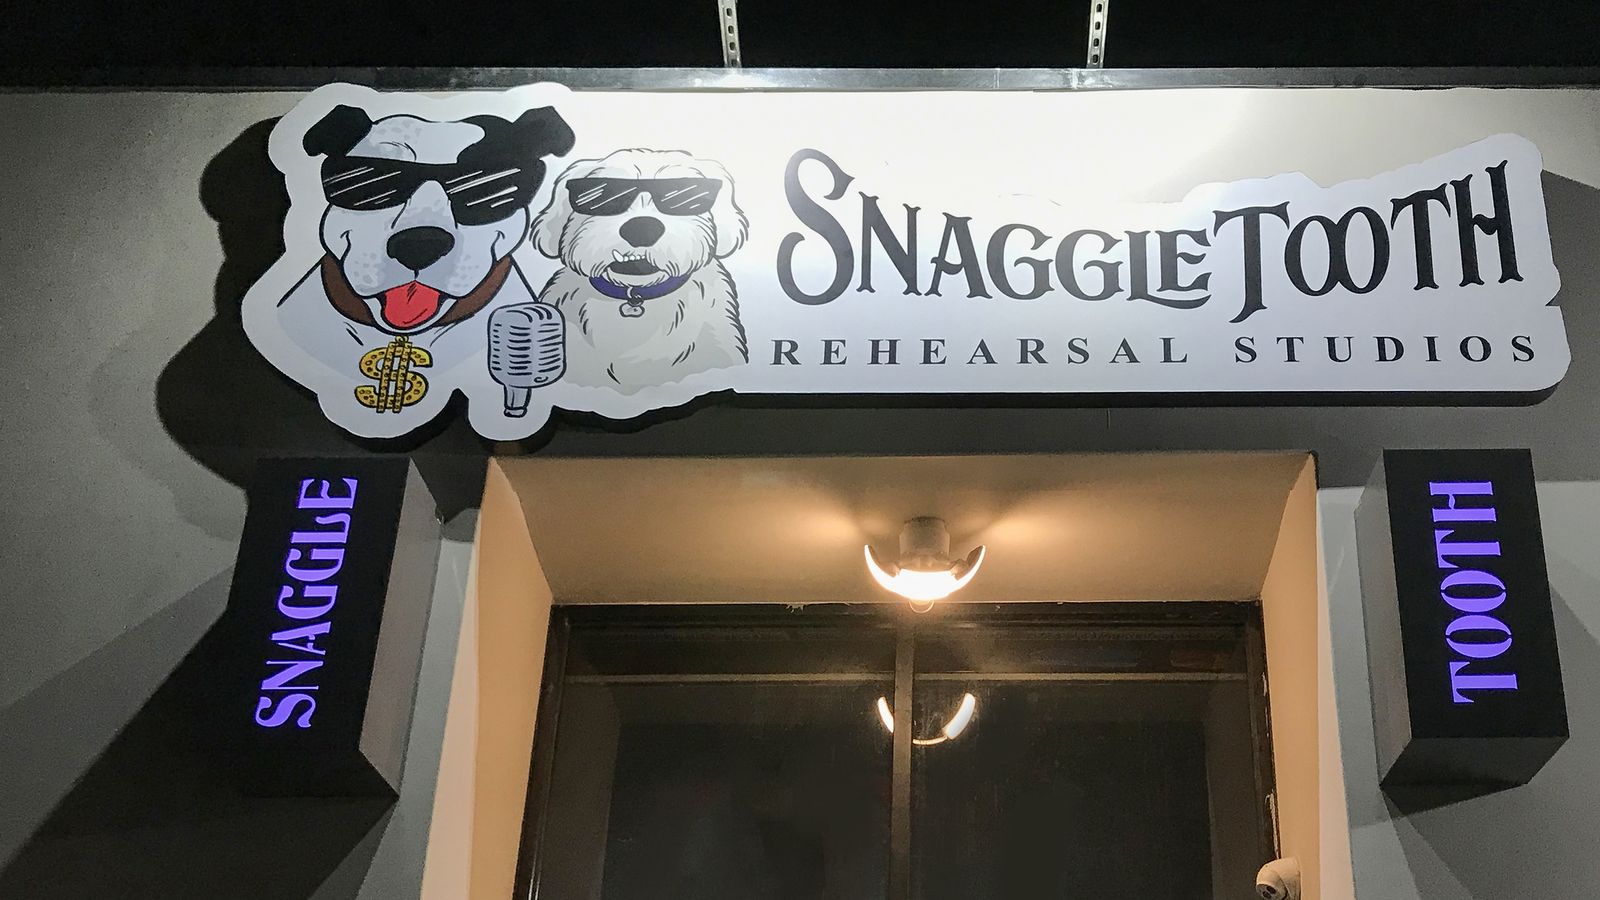 Snaggle Tooth Rehearsal Studios outdoor light boxes in black made of aluminum and acrylic